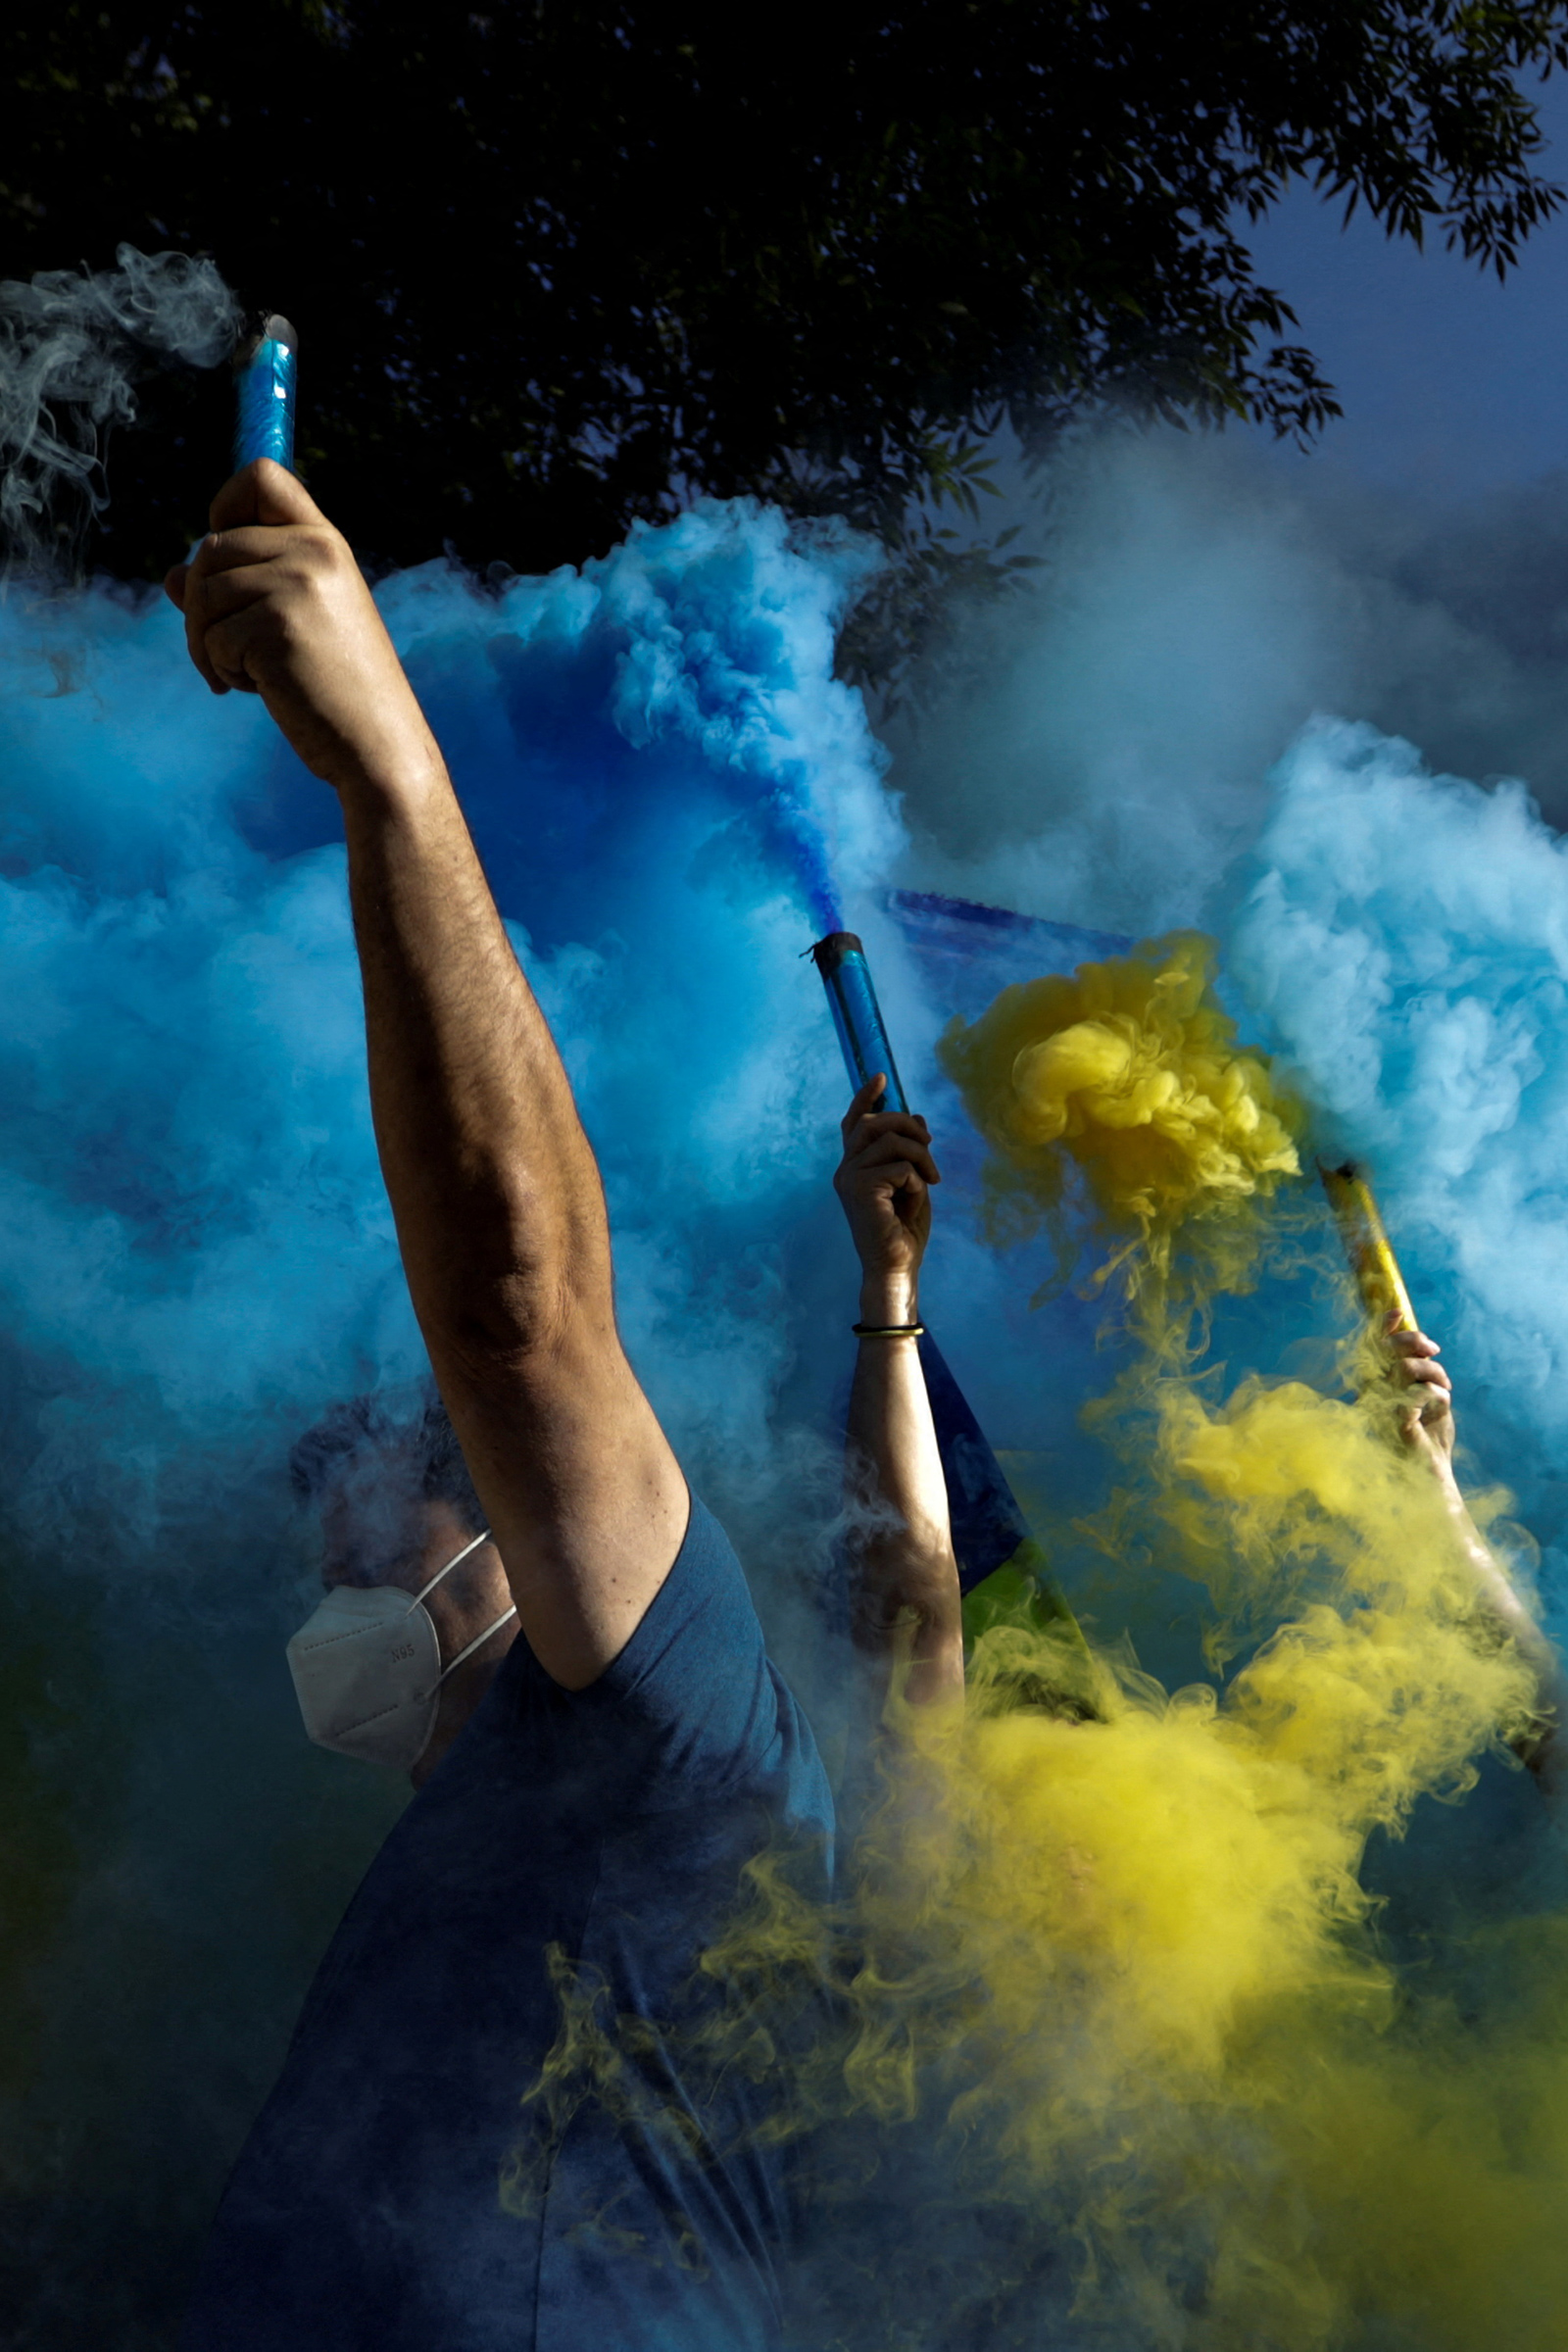 Protesters hold flares with the colors of the Ukrainian flag at an antiwar demonstration outside the Russian embassy in Mexico City on Feb. 28